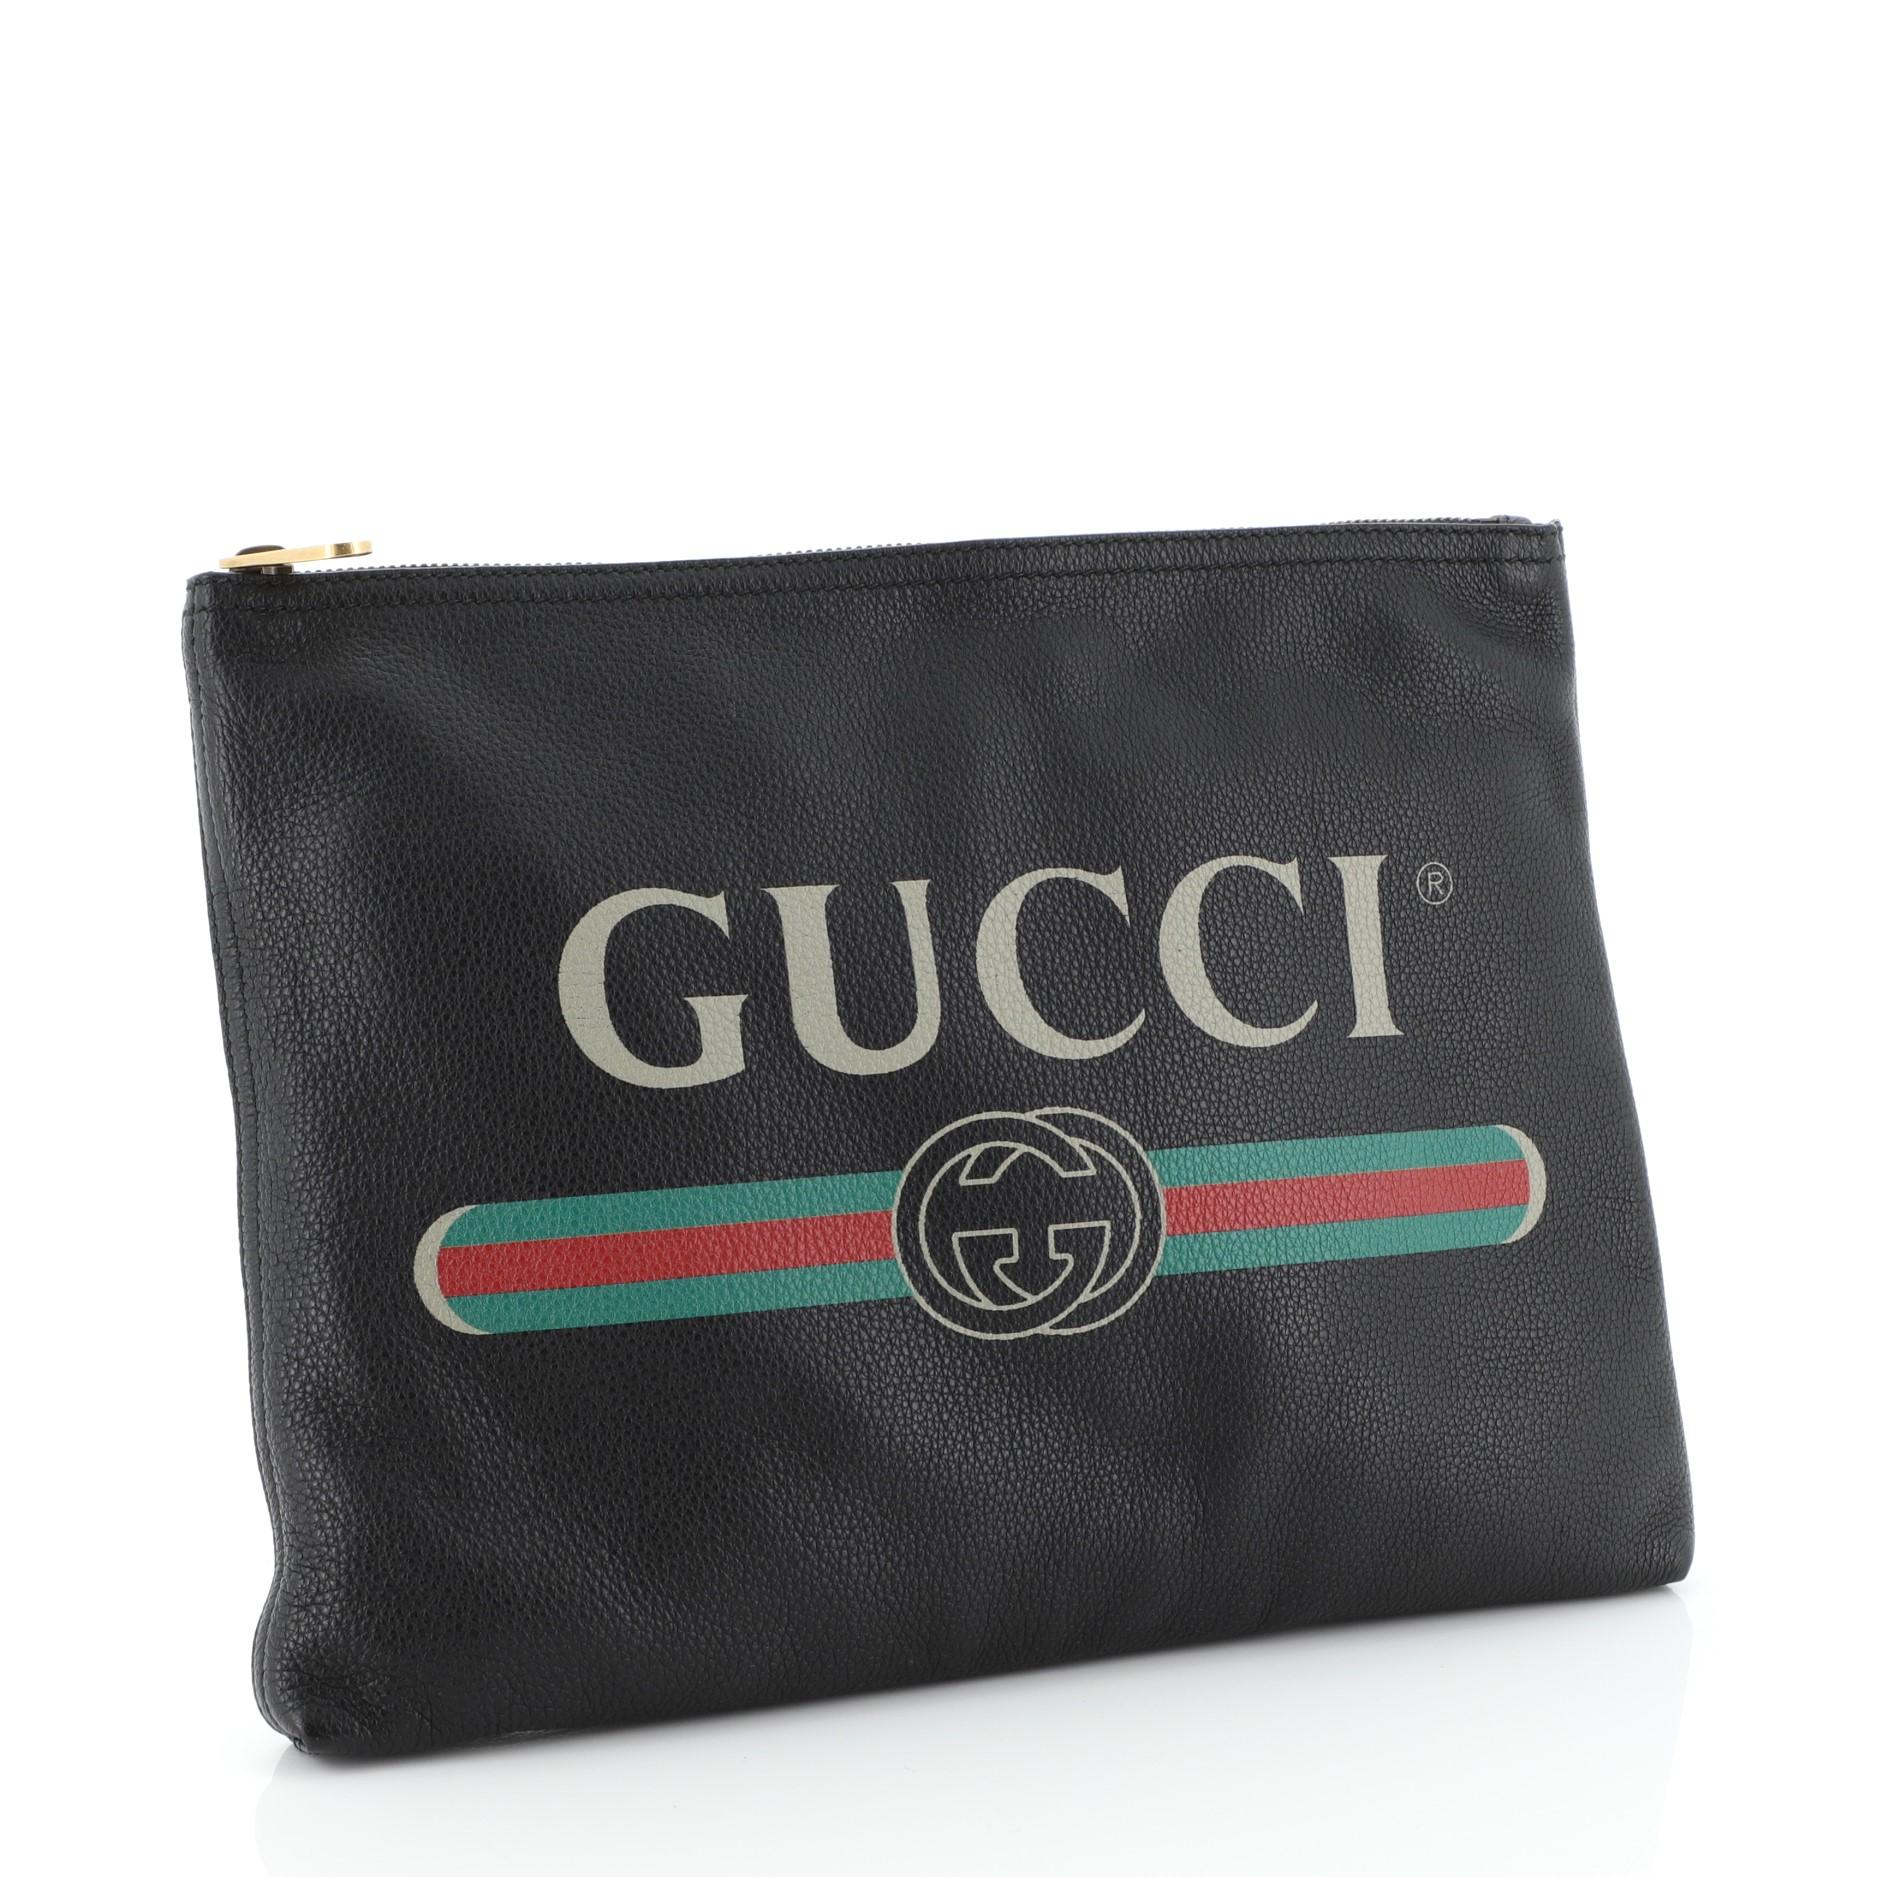 This Gucci Logo Portfolio Clutch Printed Leather Medium, crafted from pink and black leather, features printed Gucci logo and aged gold-tone hardware. Its zip closure opens to a black suede interior

Condition: Great. Minor wear on exterior and in